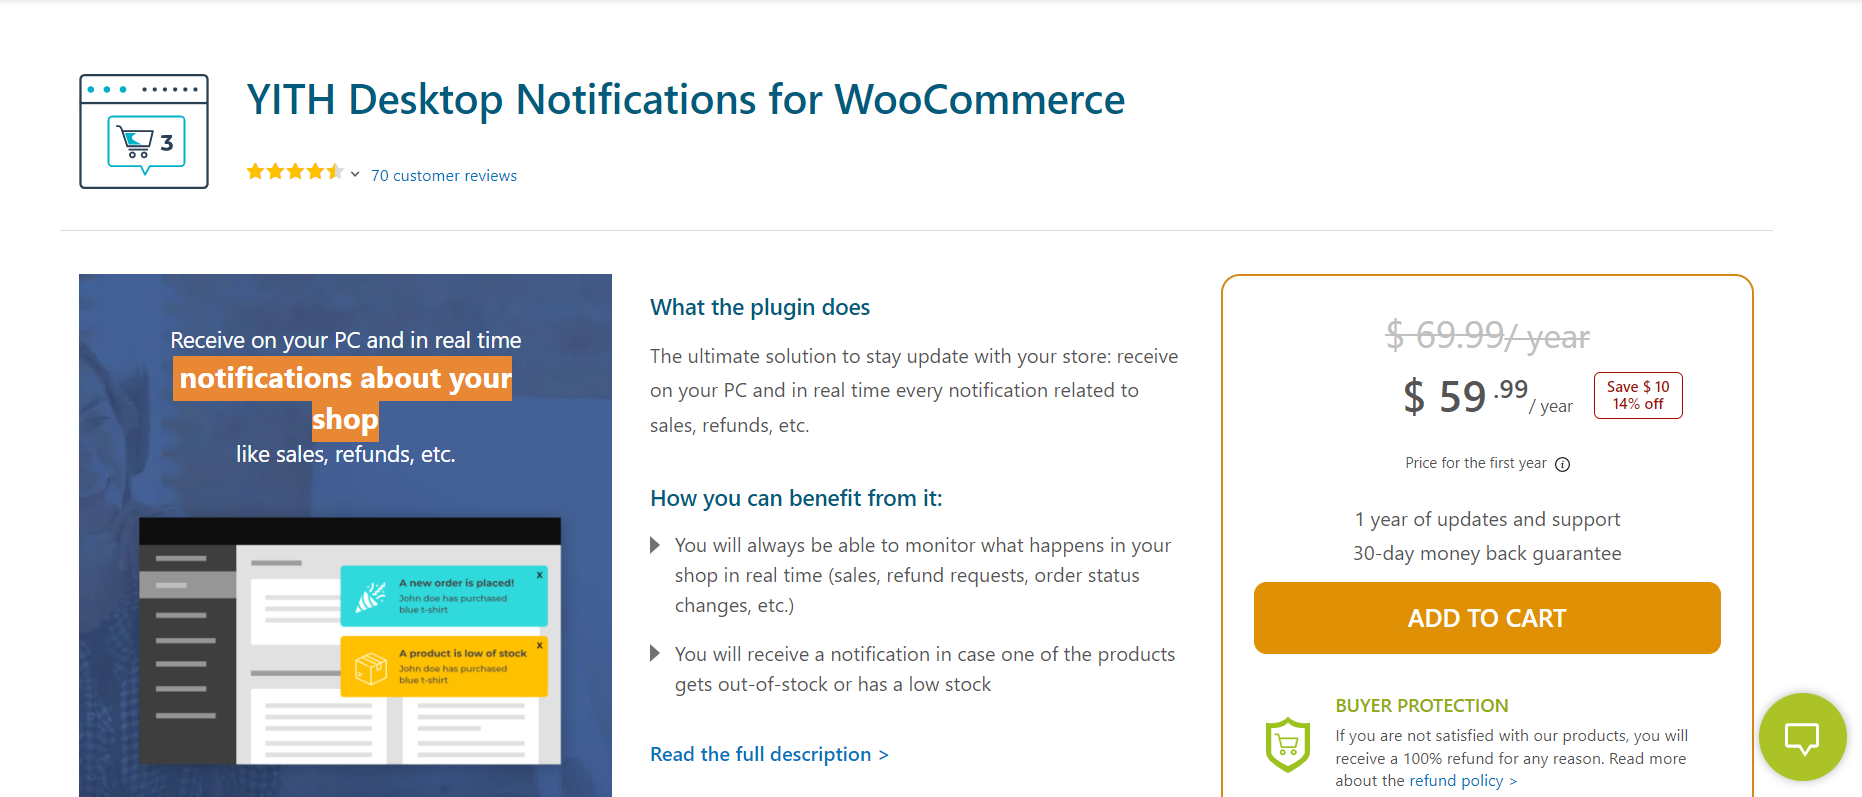 YITH Desktop Notifications for WooCommerce